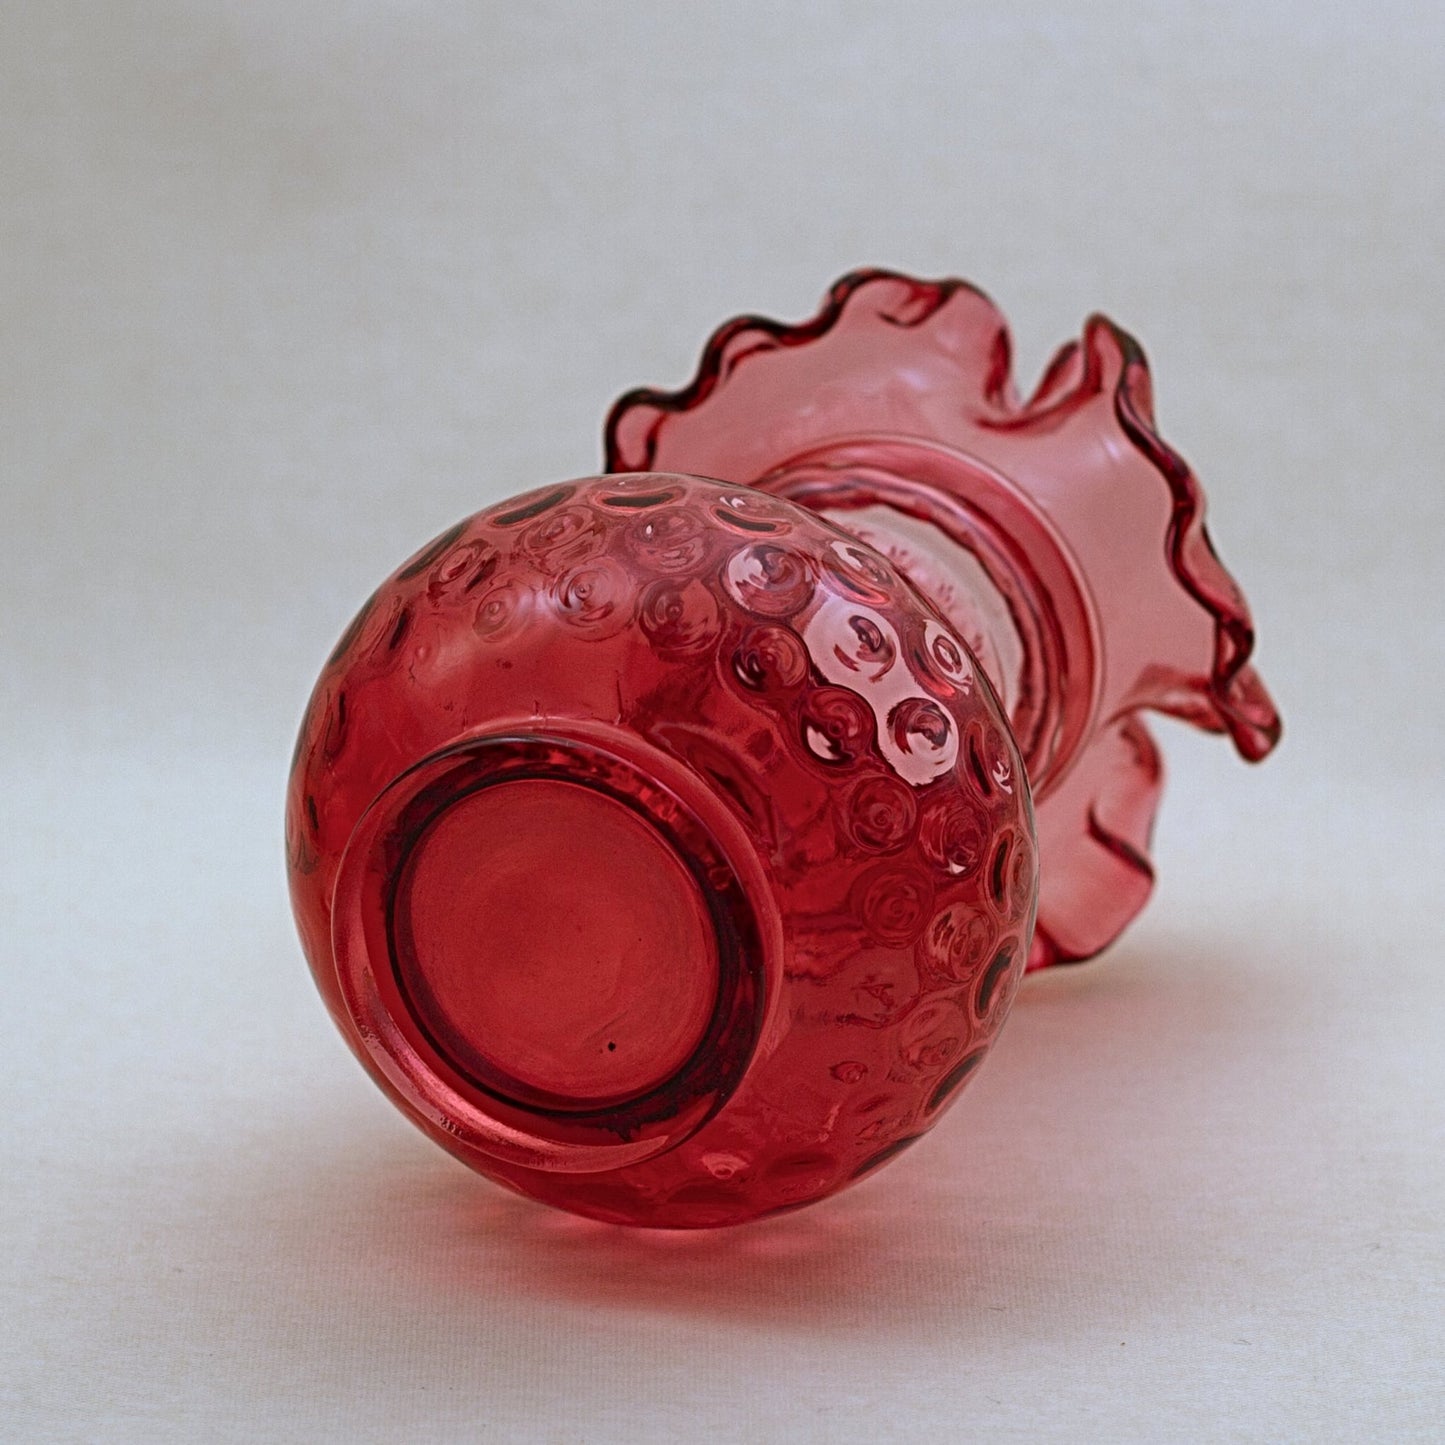 FENTON CRANBERRY ART GLASS Two-Ring Vase with Ruffled Edge in Ruby Overlay & Polka Dot Pattern Circa 1950s